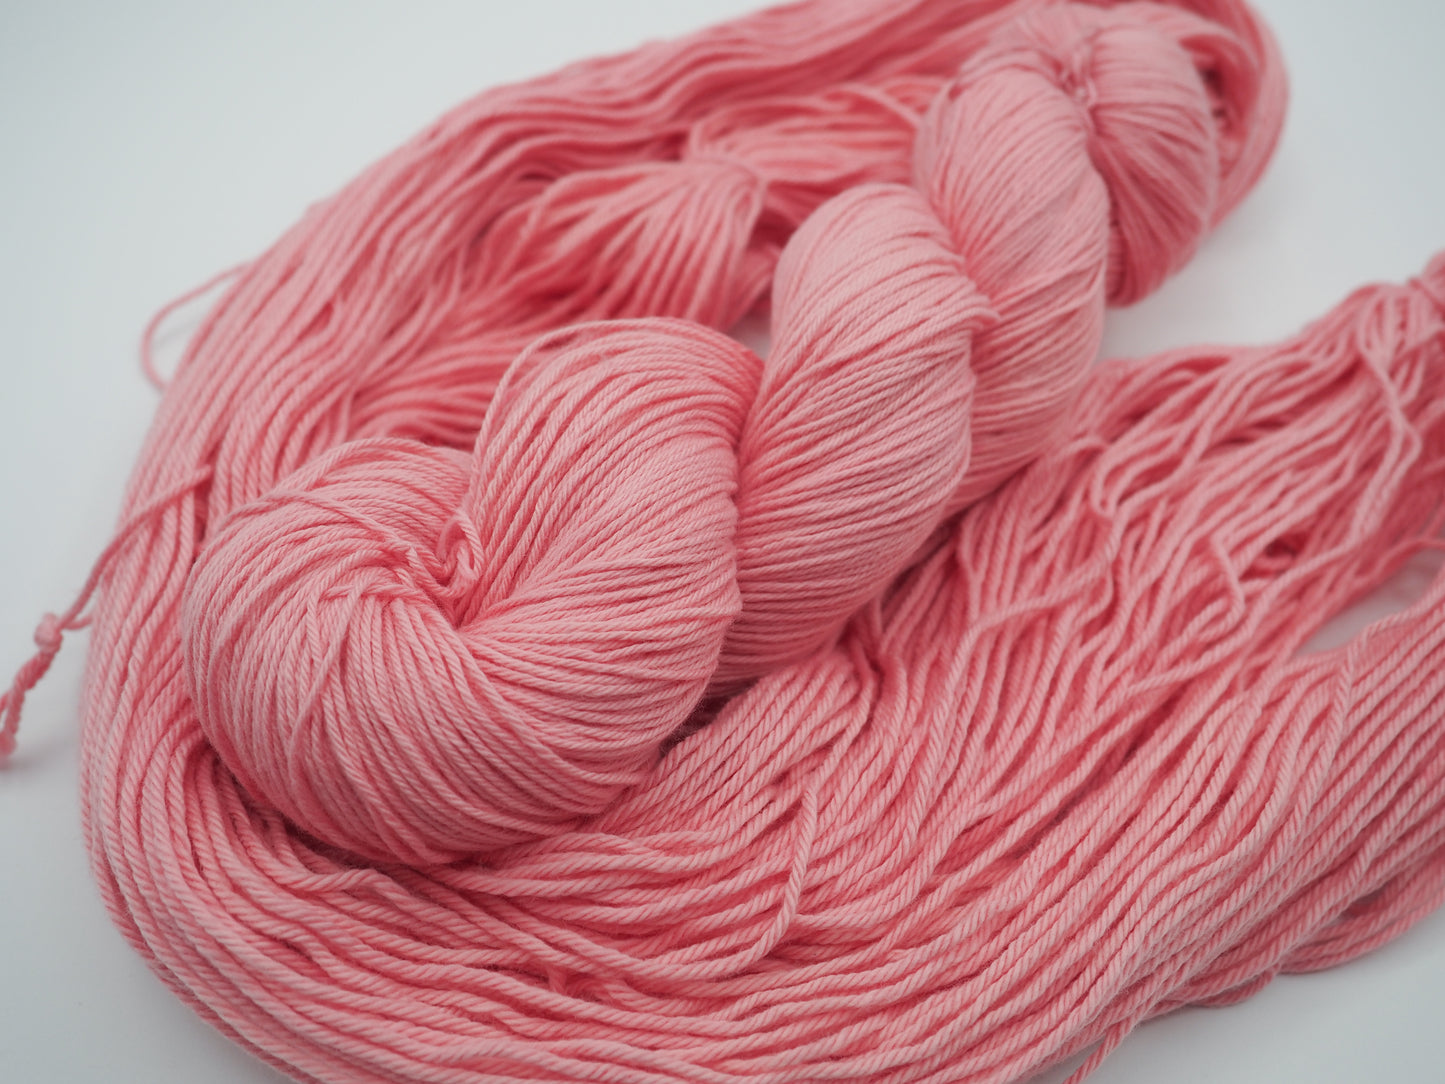 Bubblegum - Dyed to Order *Please allow 3-4 weeks for dyeing*